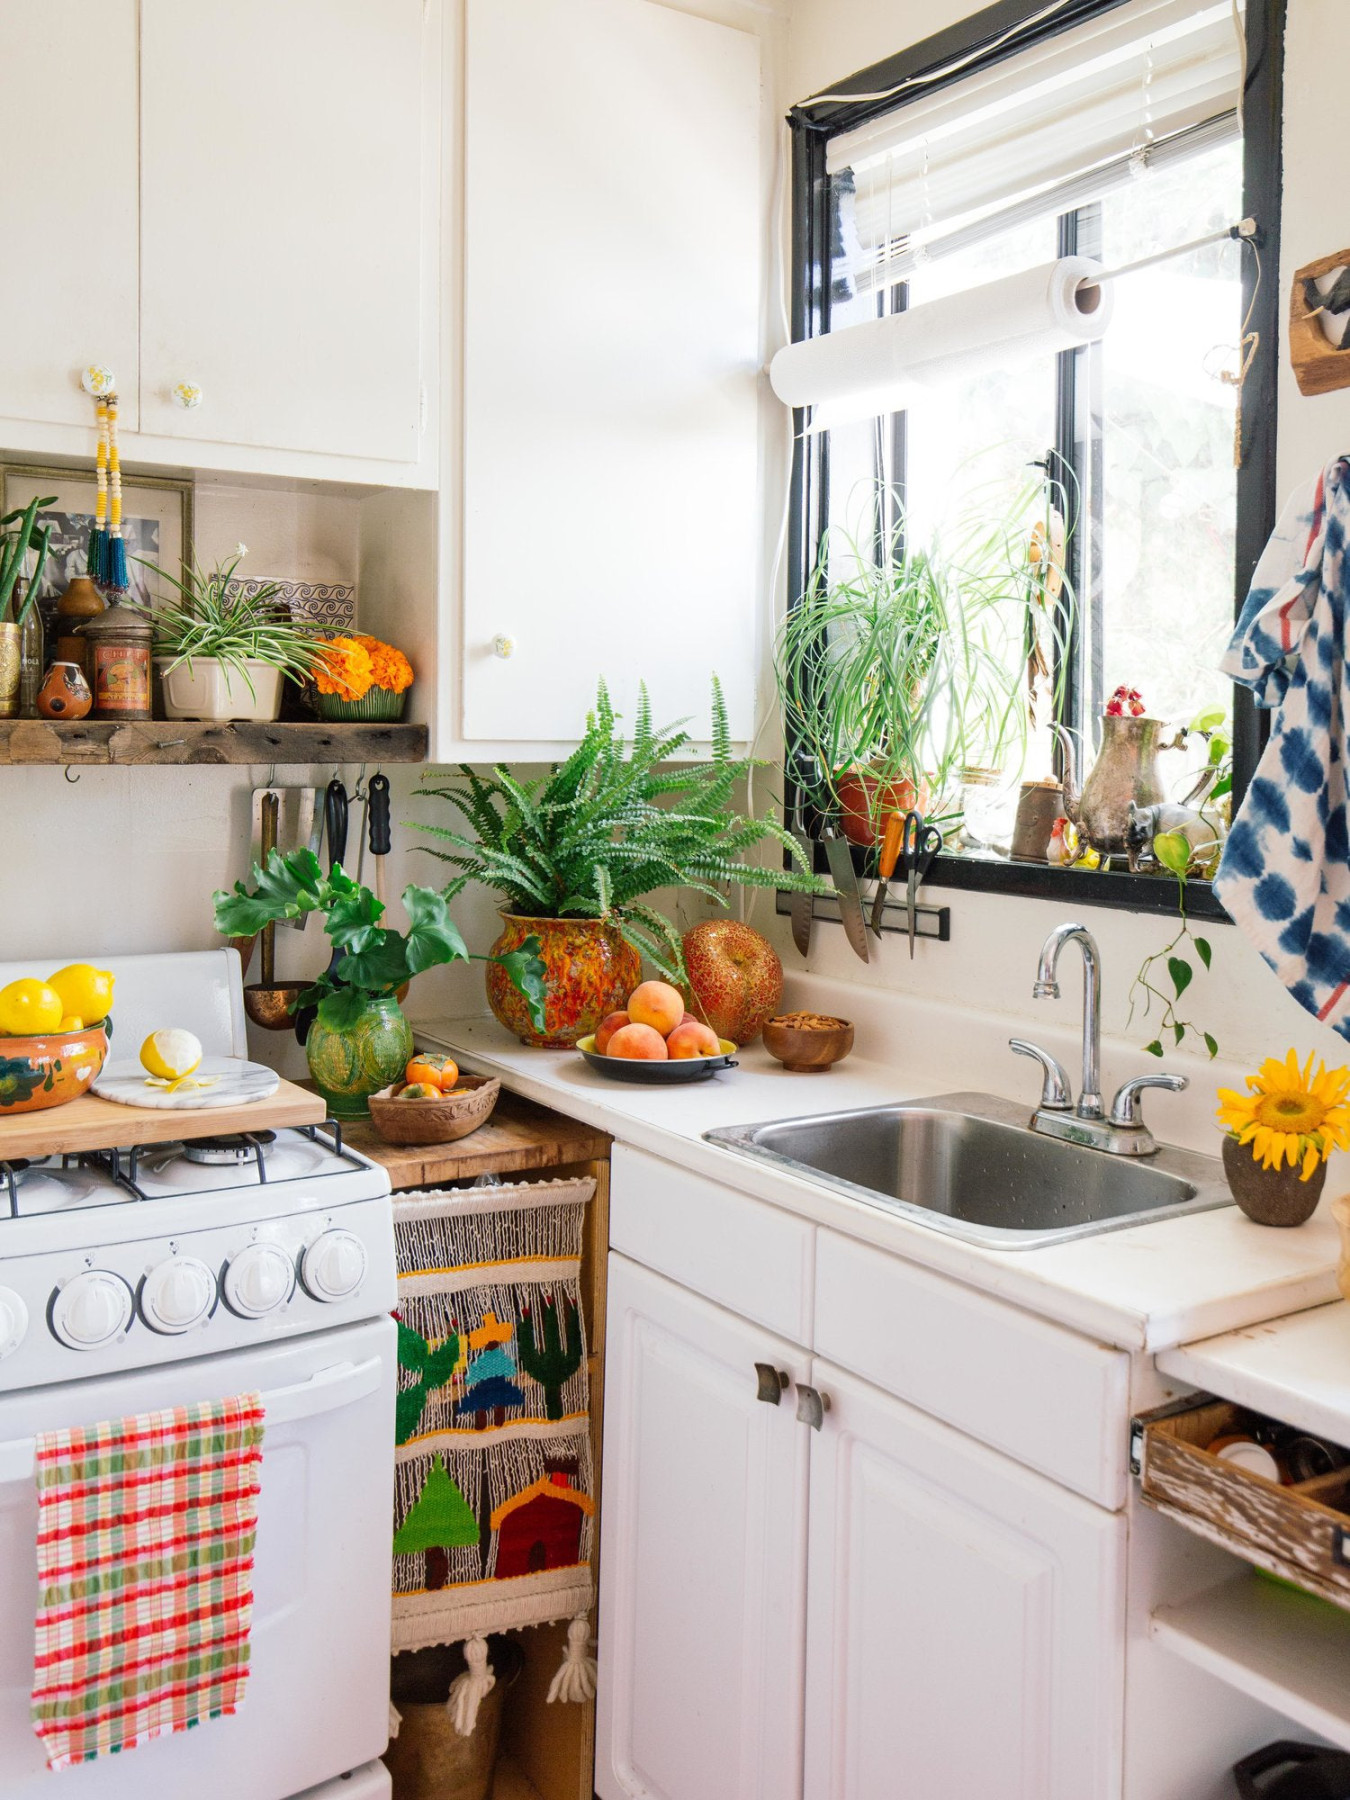 Tiny House Kitchen Ideas To Help You Make the Most of Your Small